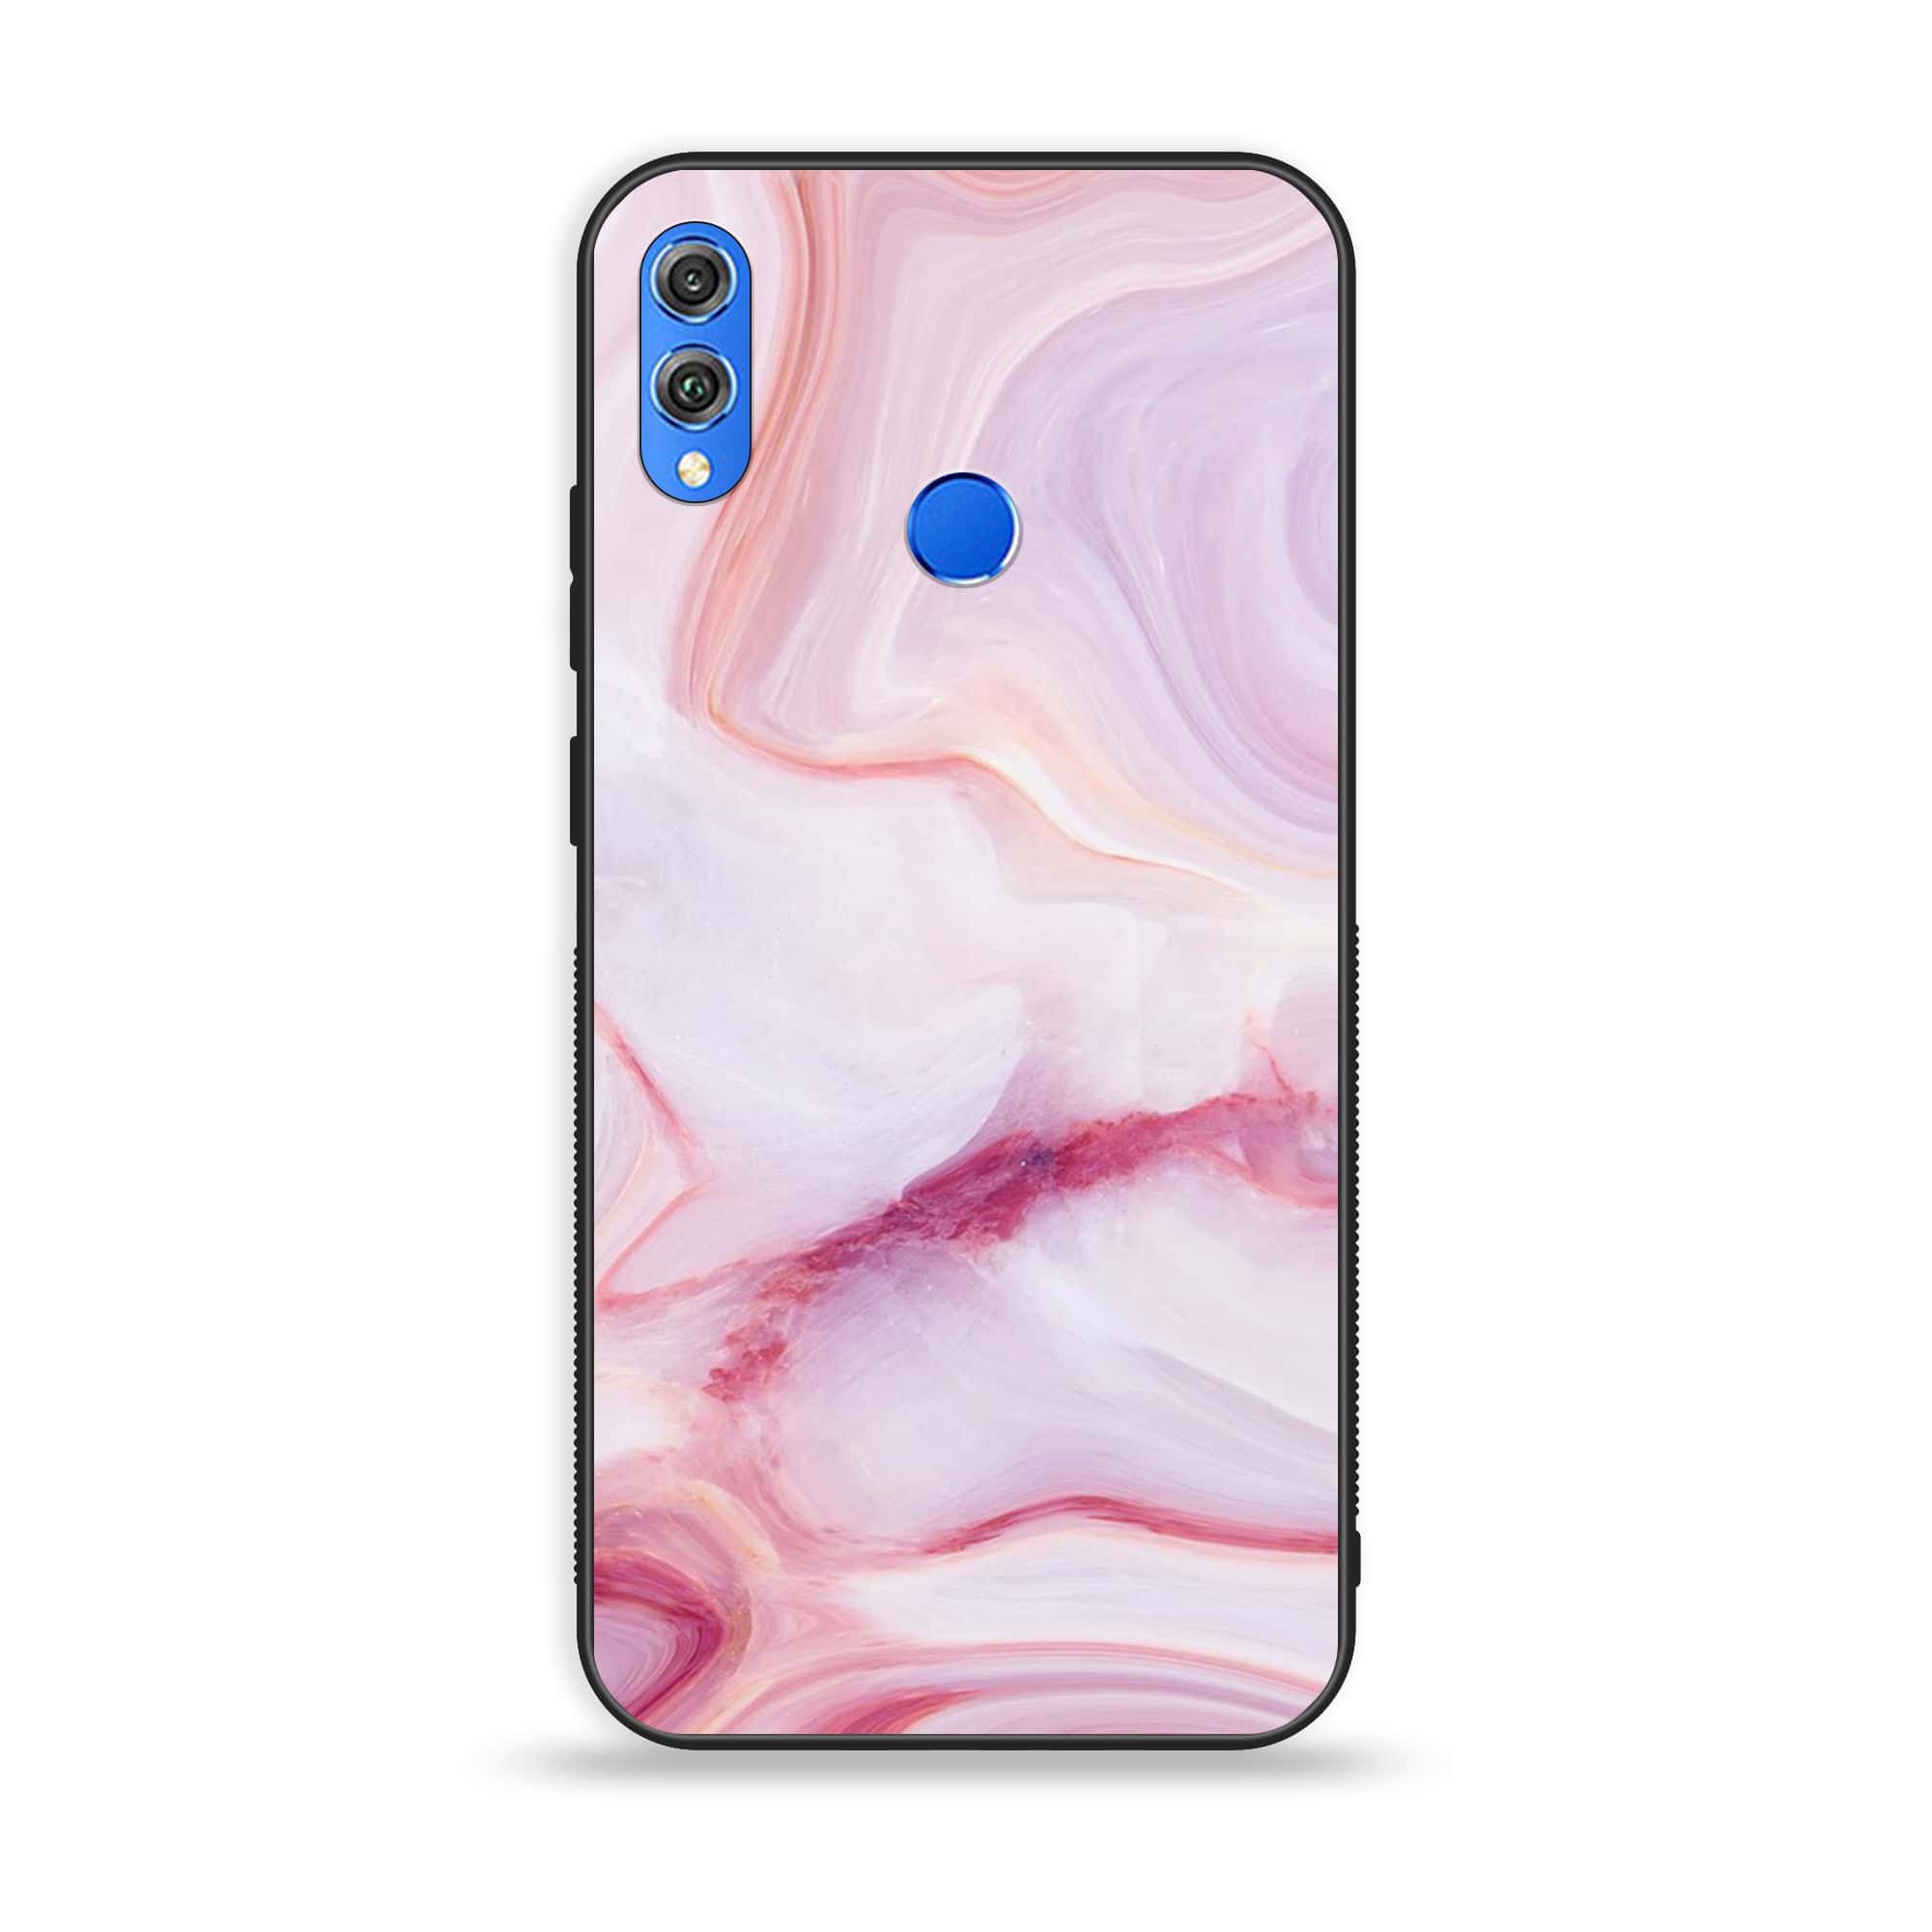 Huawei Honor 8X -  Pink Marble Series - Premium Printed Glass soft Bumper shock Proof Case